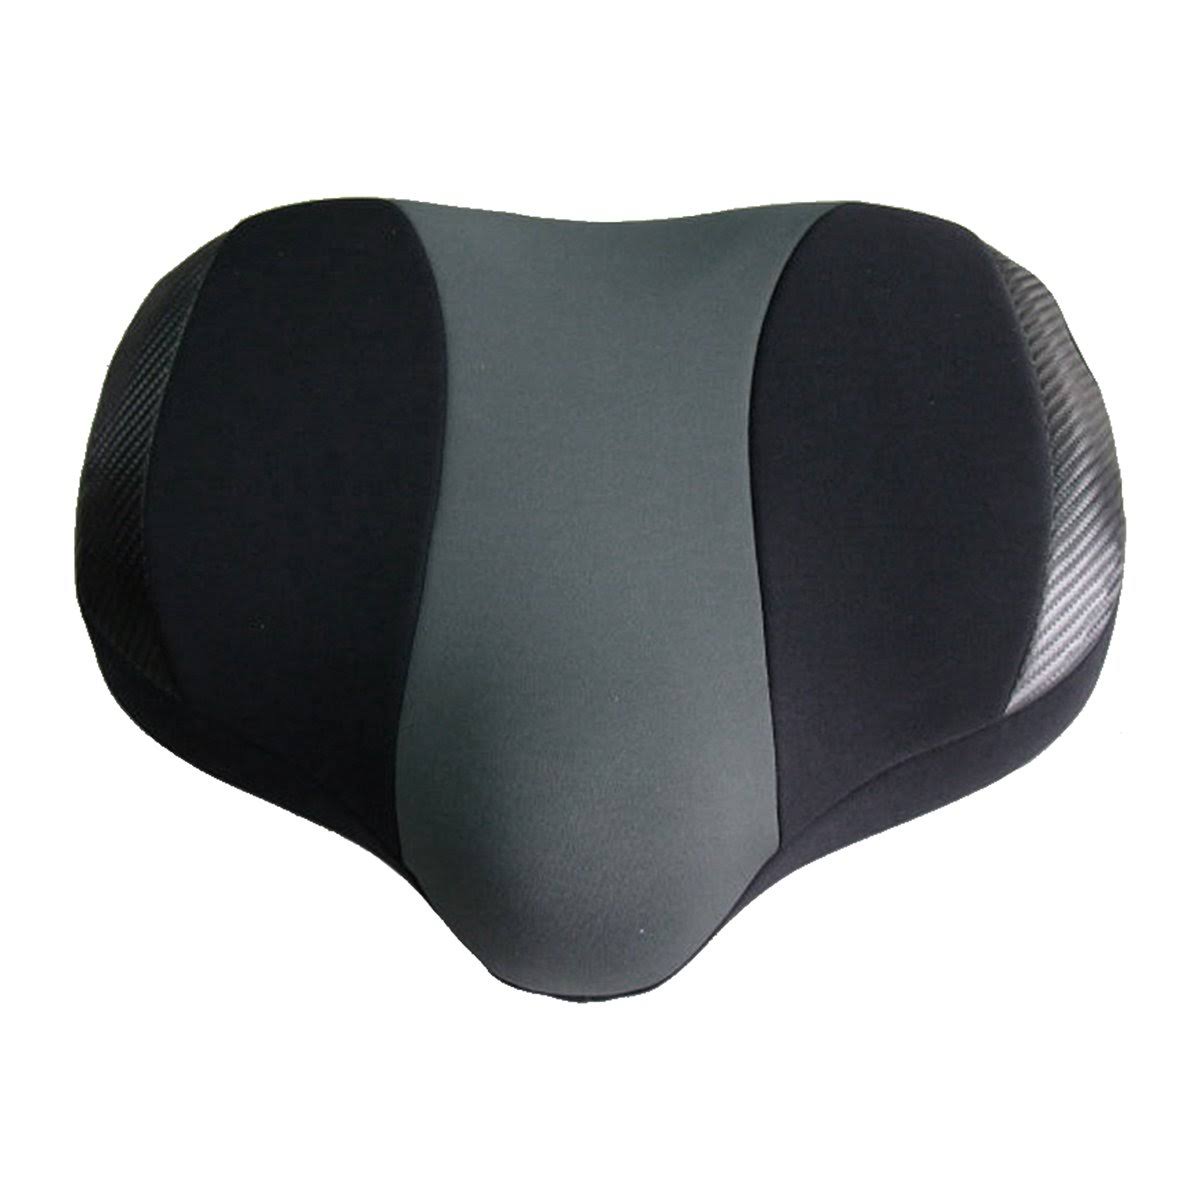 Sun EZ Replacement Tricycle Saddle Cushion with Cover - Black/Gray